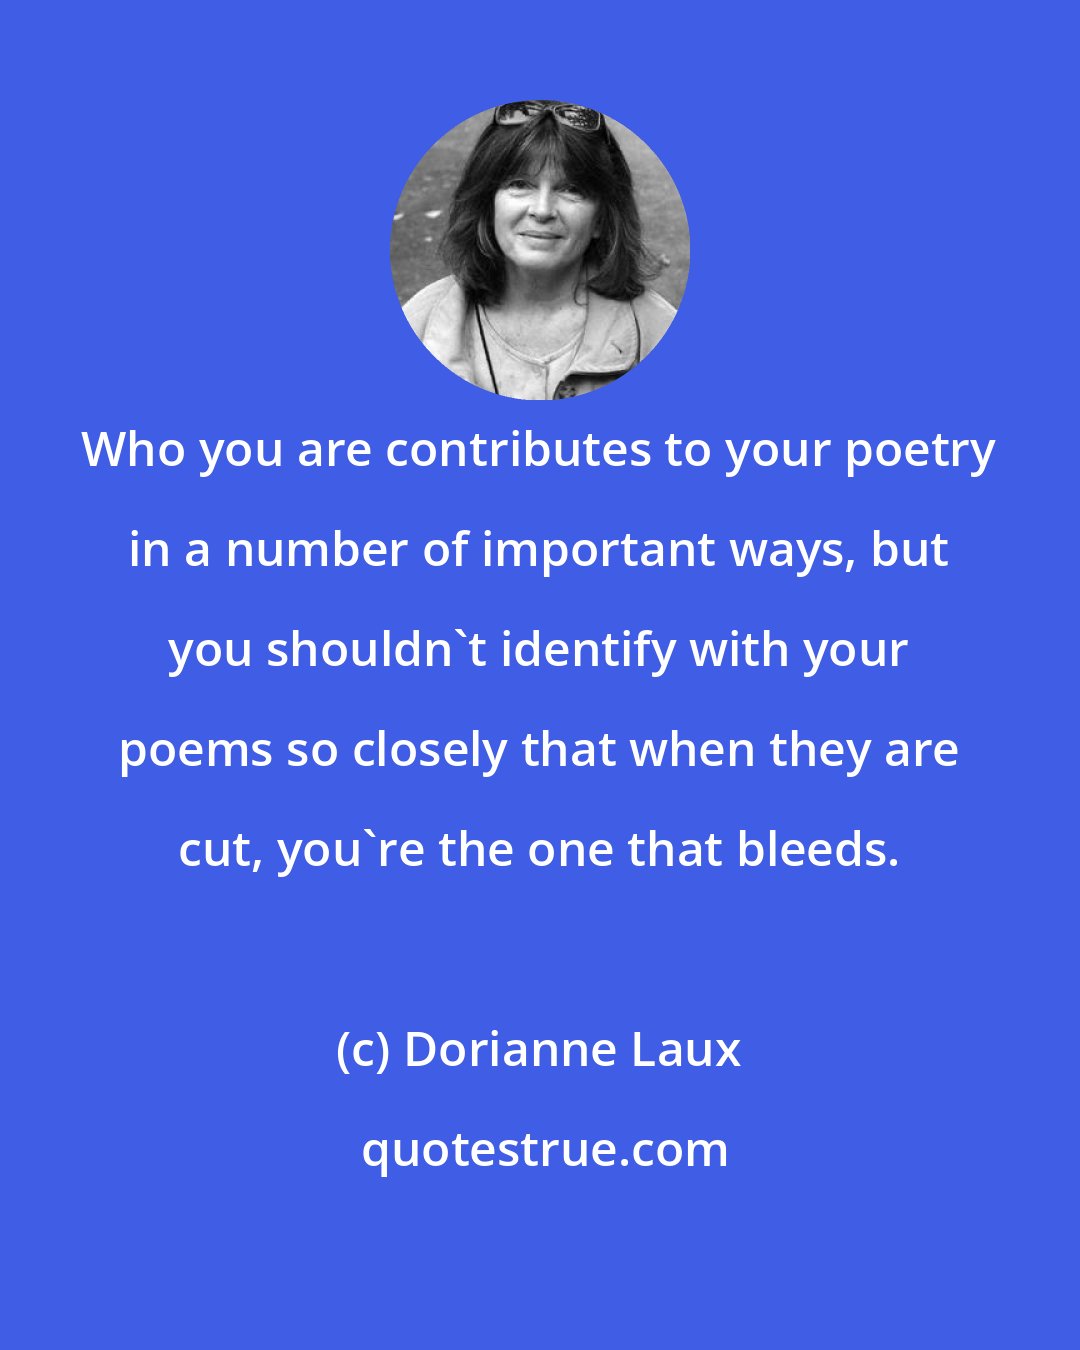 Dorianne Laux: Who you are contributes to your poetry in a number of important ways, but you shouldn't identify with your poems so closely that when they are cut, you're the one that bleeds.